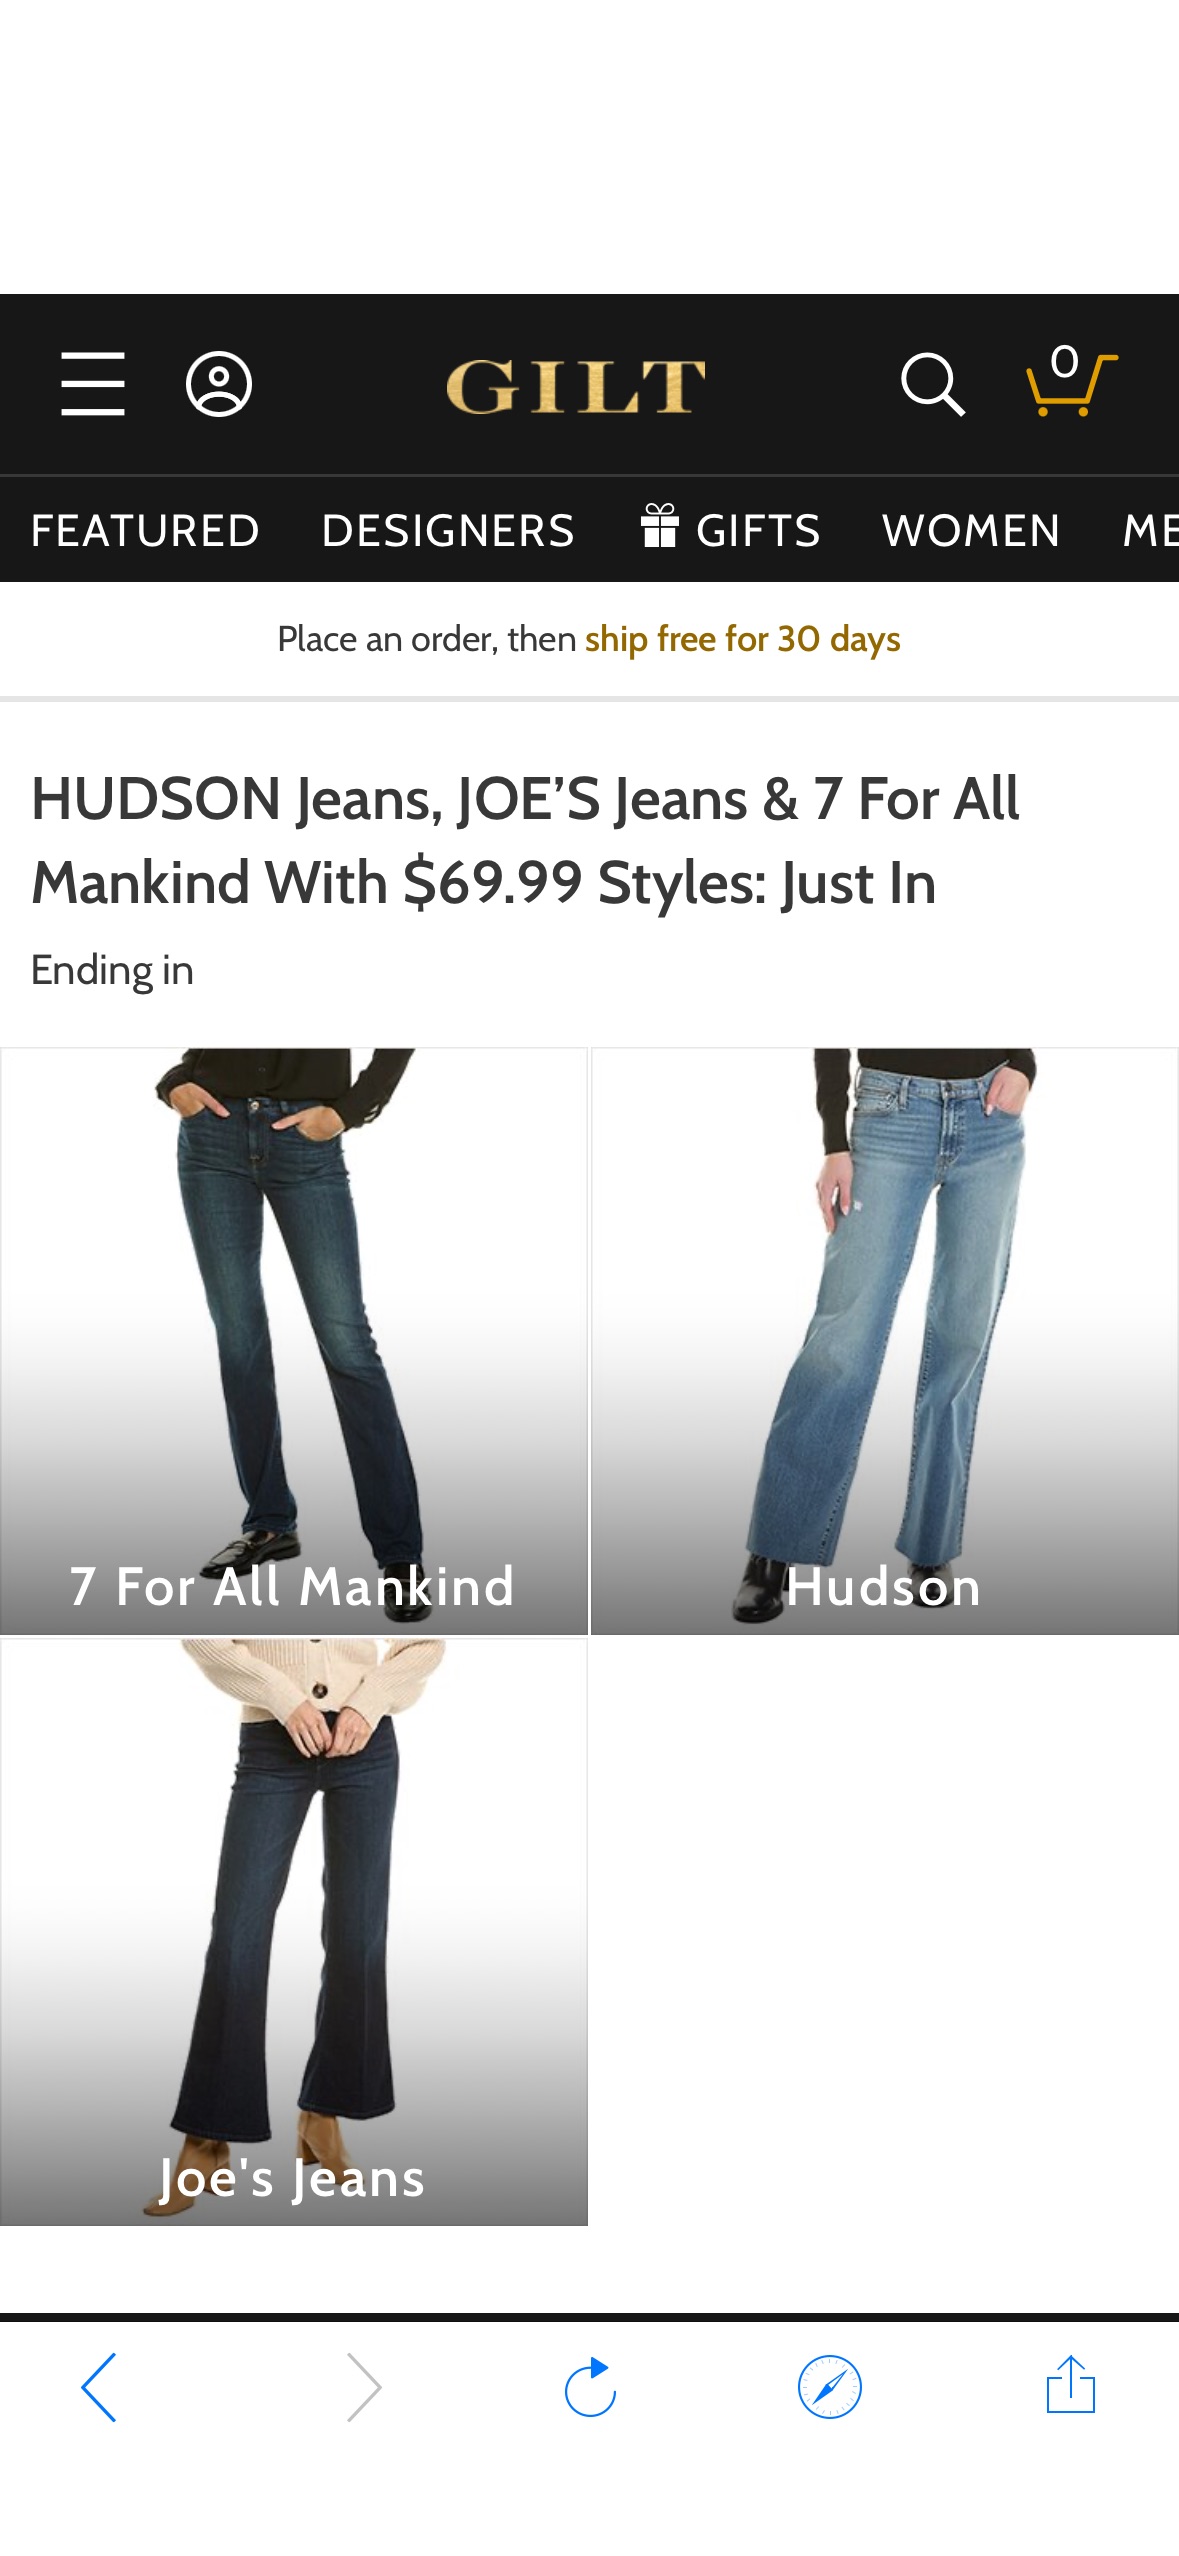 HUDSON Jeans, JOE’S Jeans & 7 For All Mankind With $69.99 Styles: Just In / Gilt